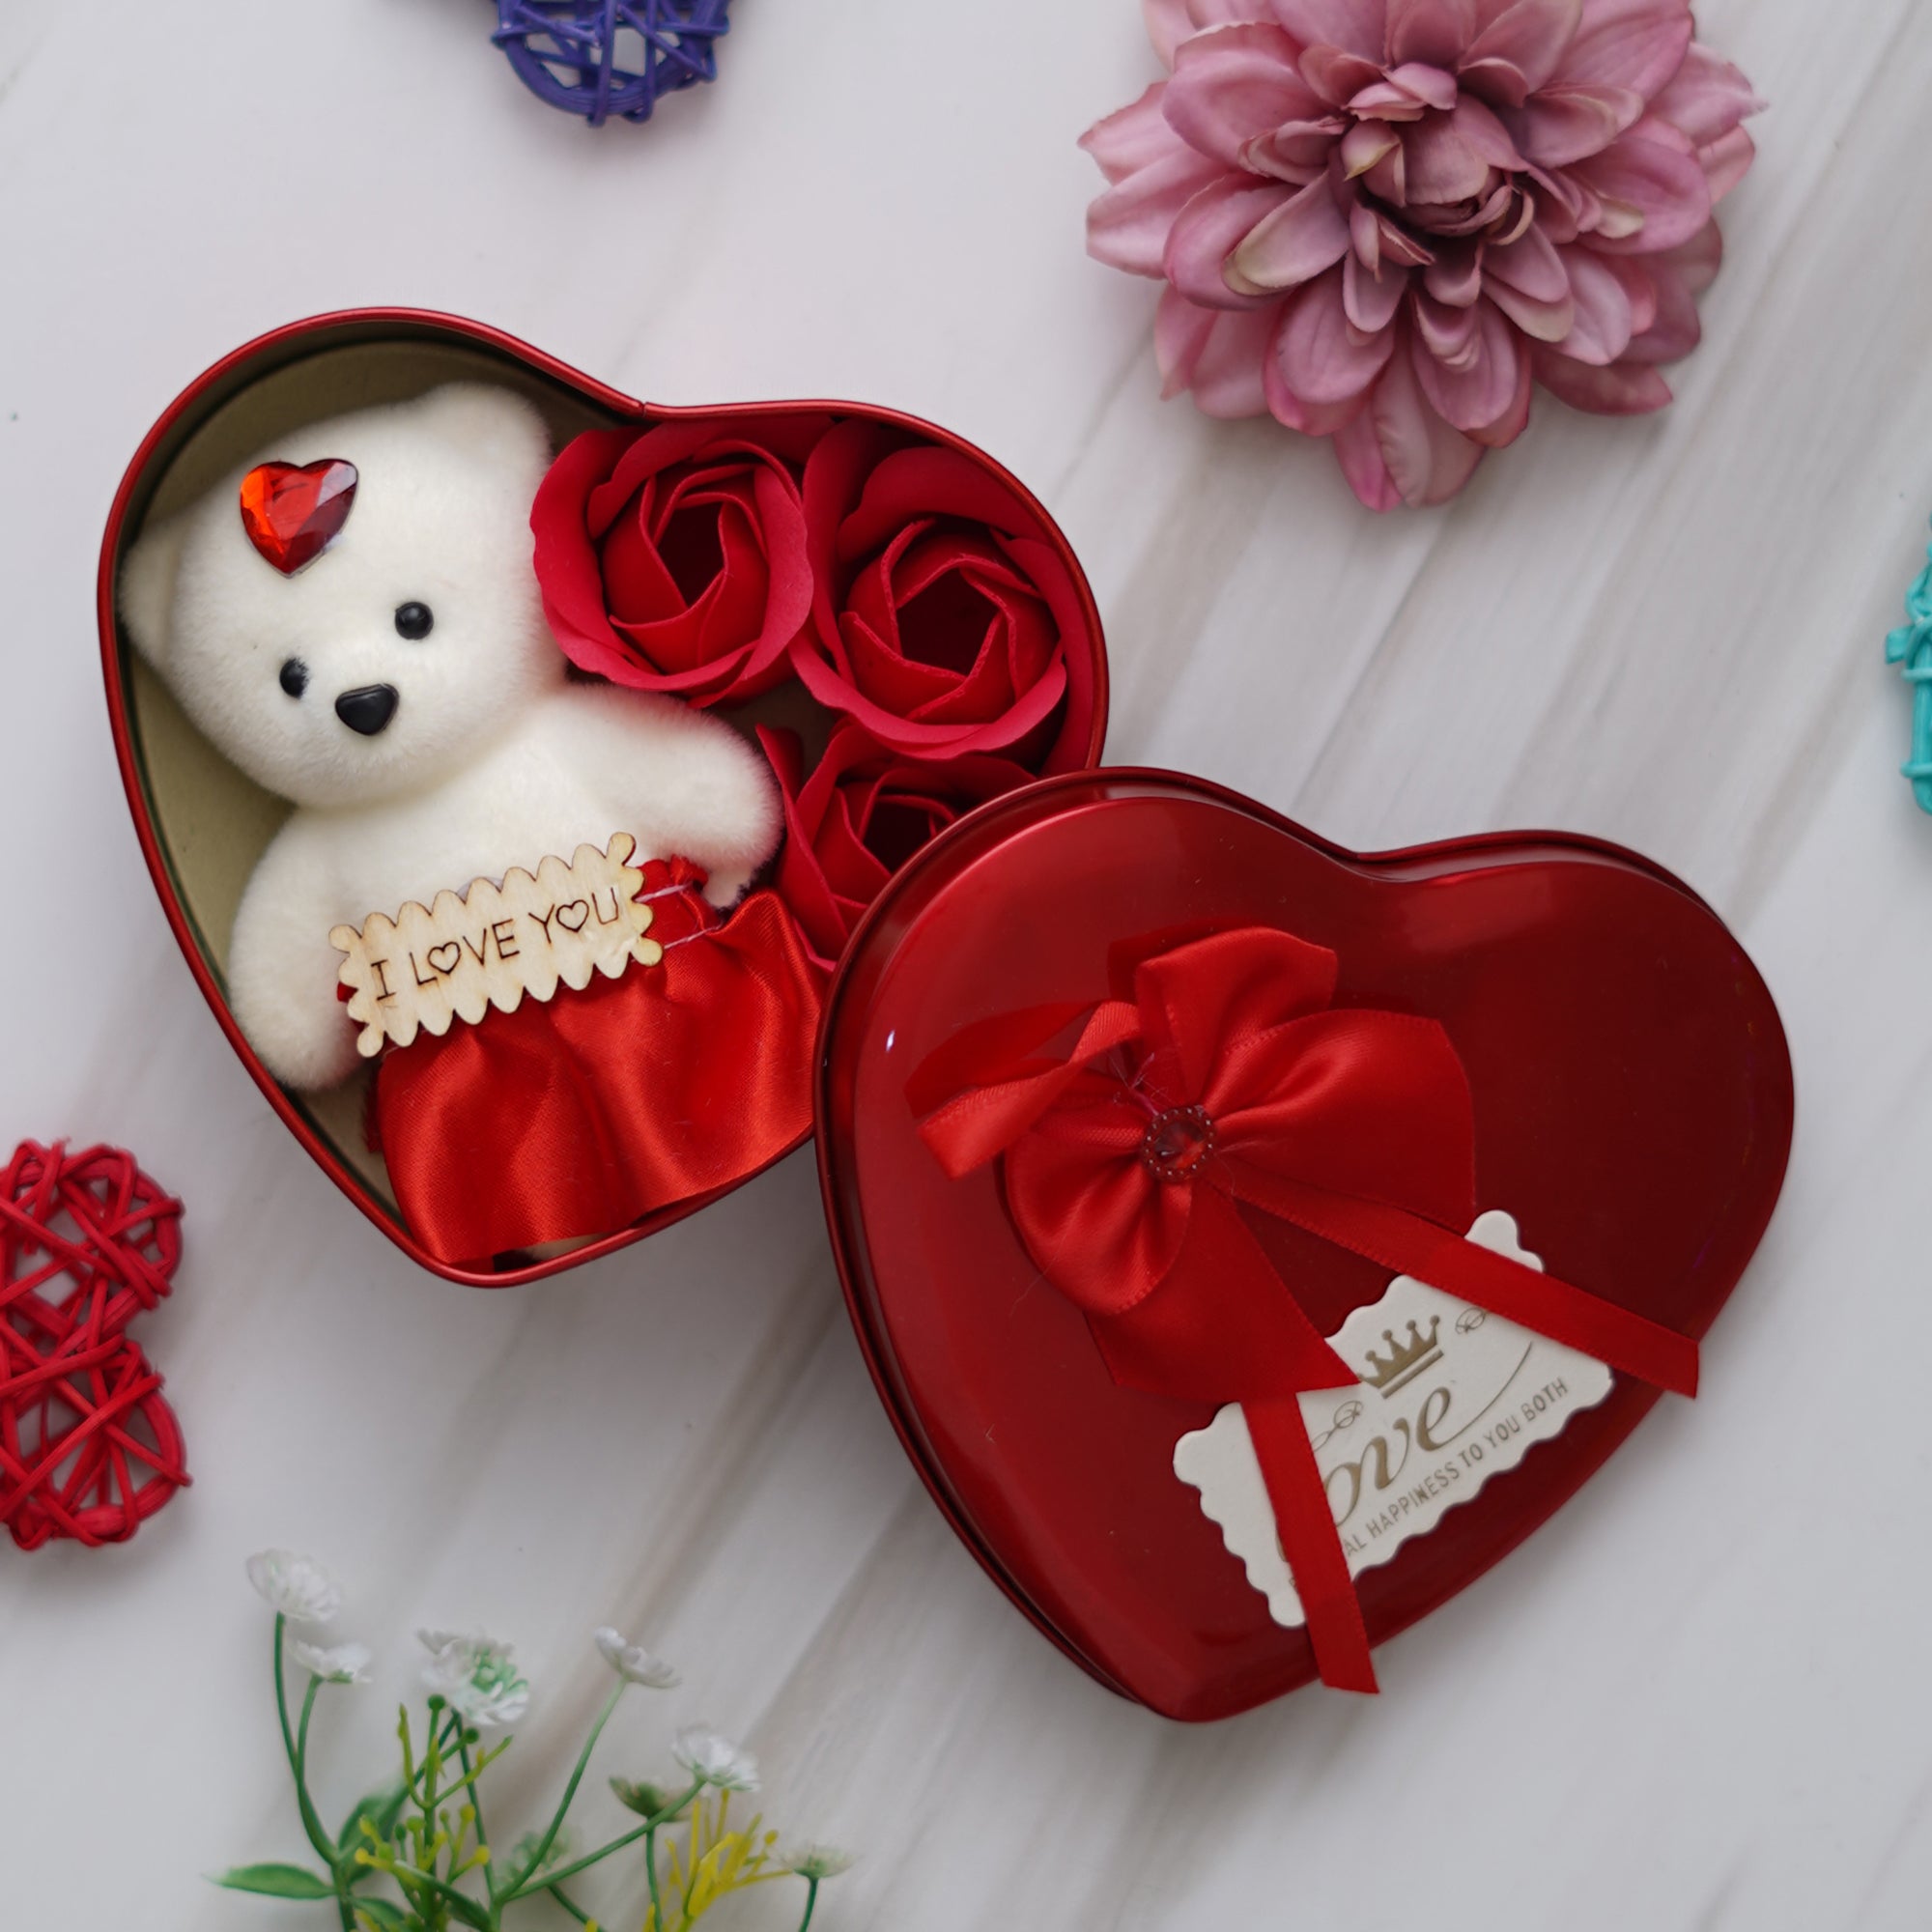 Valentine Combo of Golden Rose Gift Set, "Love You" Wooden Showpiece With Stand, Heart Shaped Gift Box Set with White Teddy and Red Roses 5